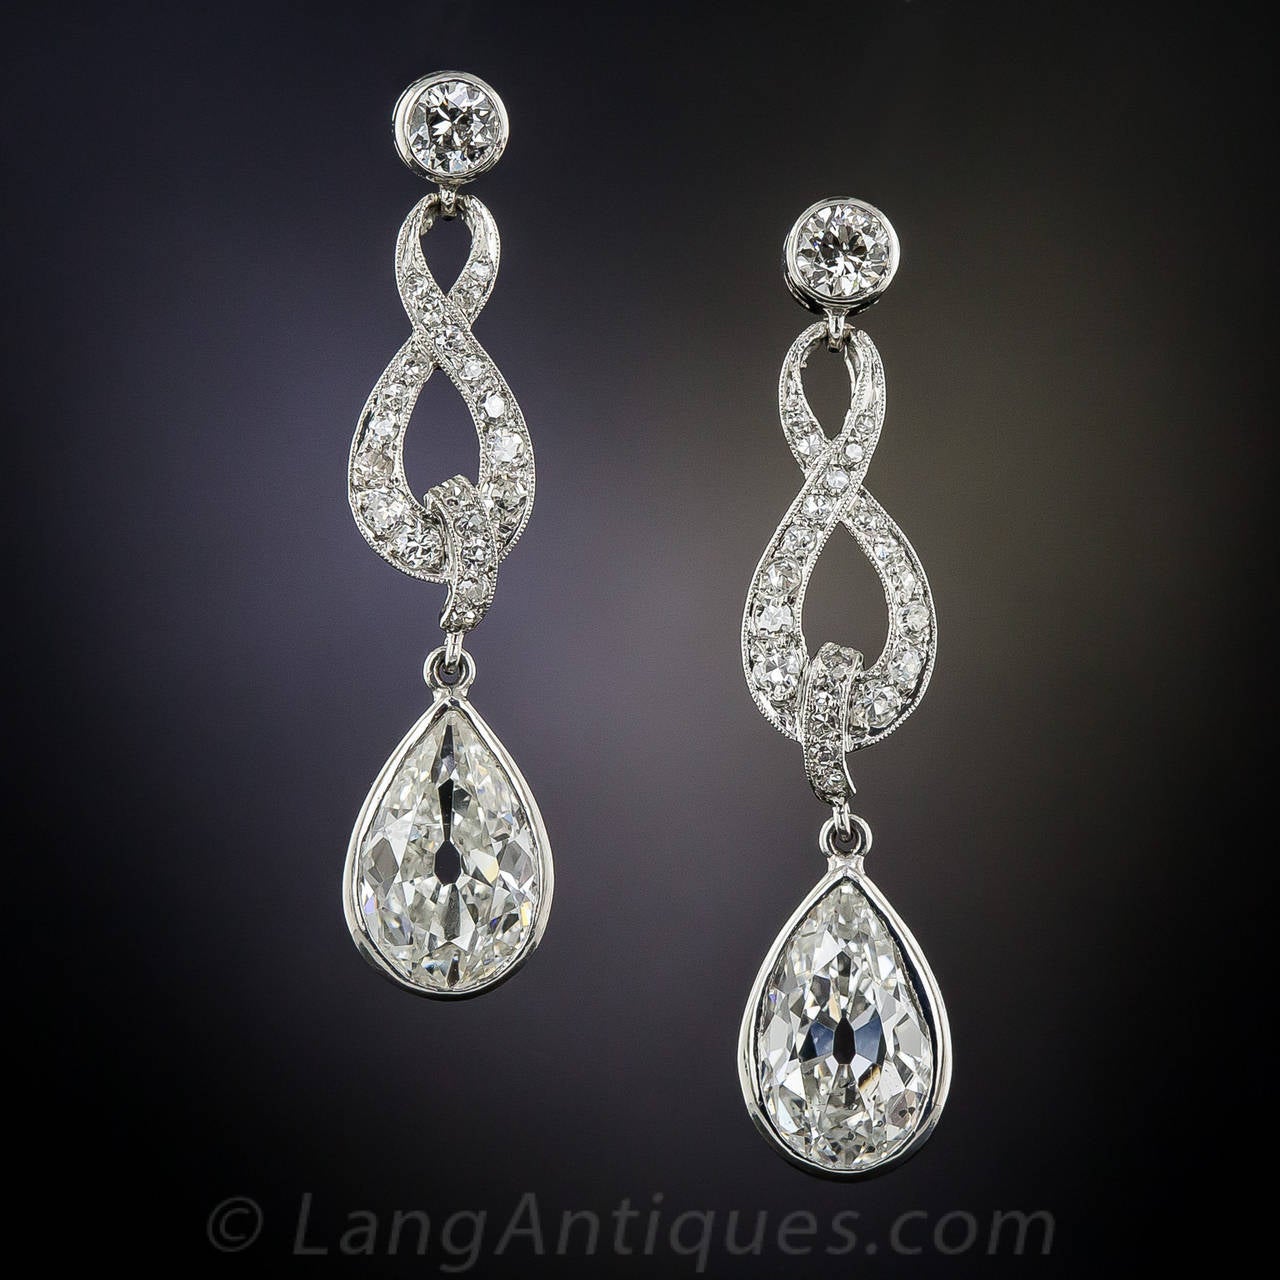 A sparkling pair of old mine-cut pear-shape diamonds, totaling approximately 2.65 carats, swing and sway from within bezel settings surmounted by beautifully stylized figure-eight, or infinity motifs, in these delightful and dazzling drop earrings